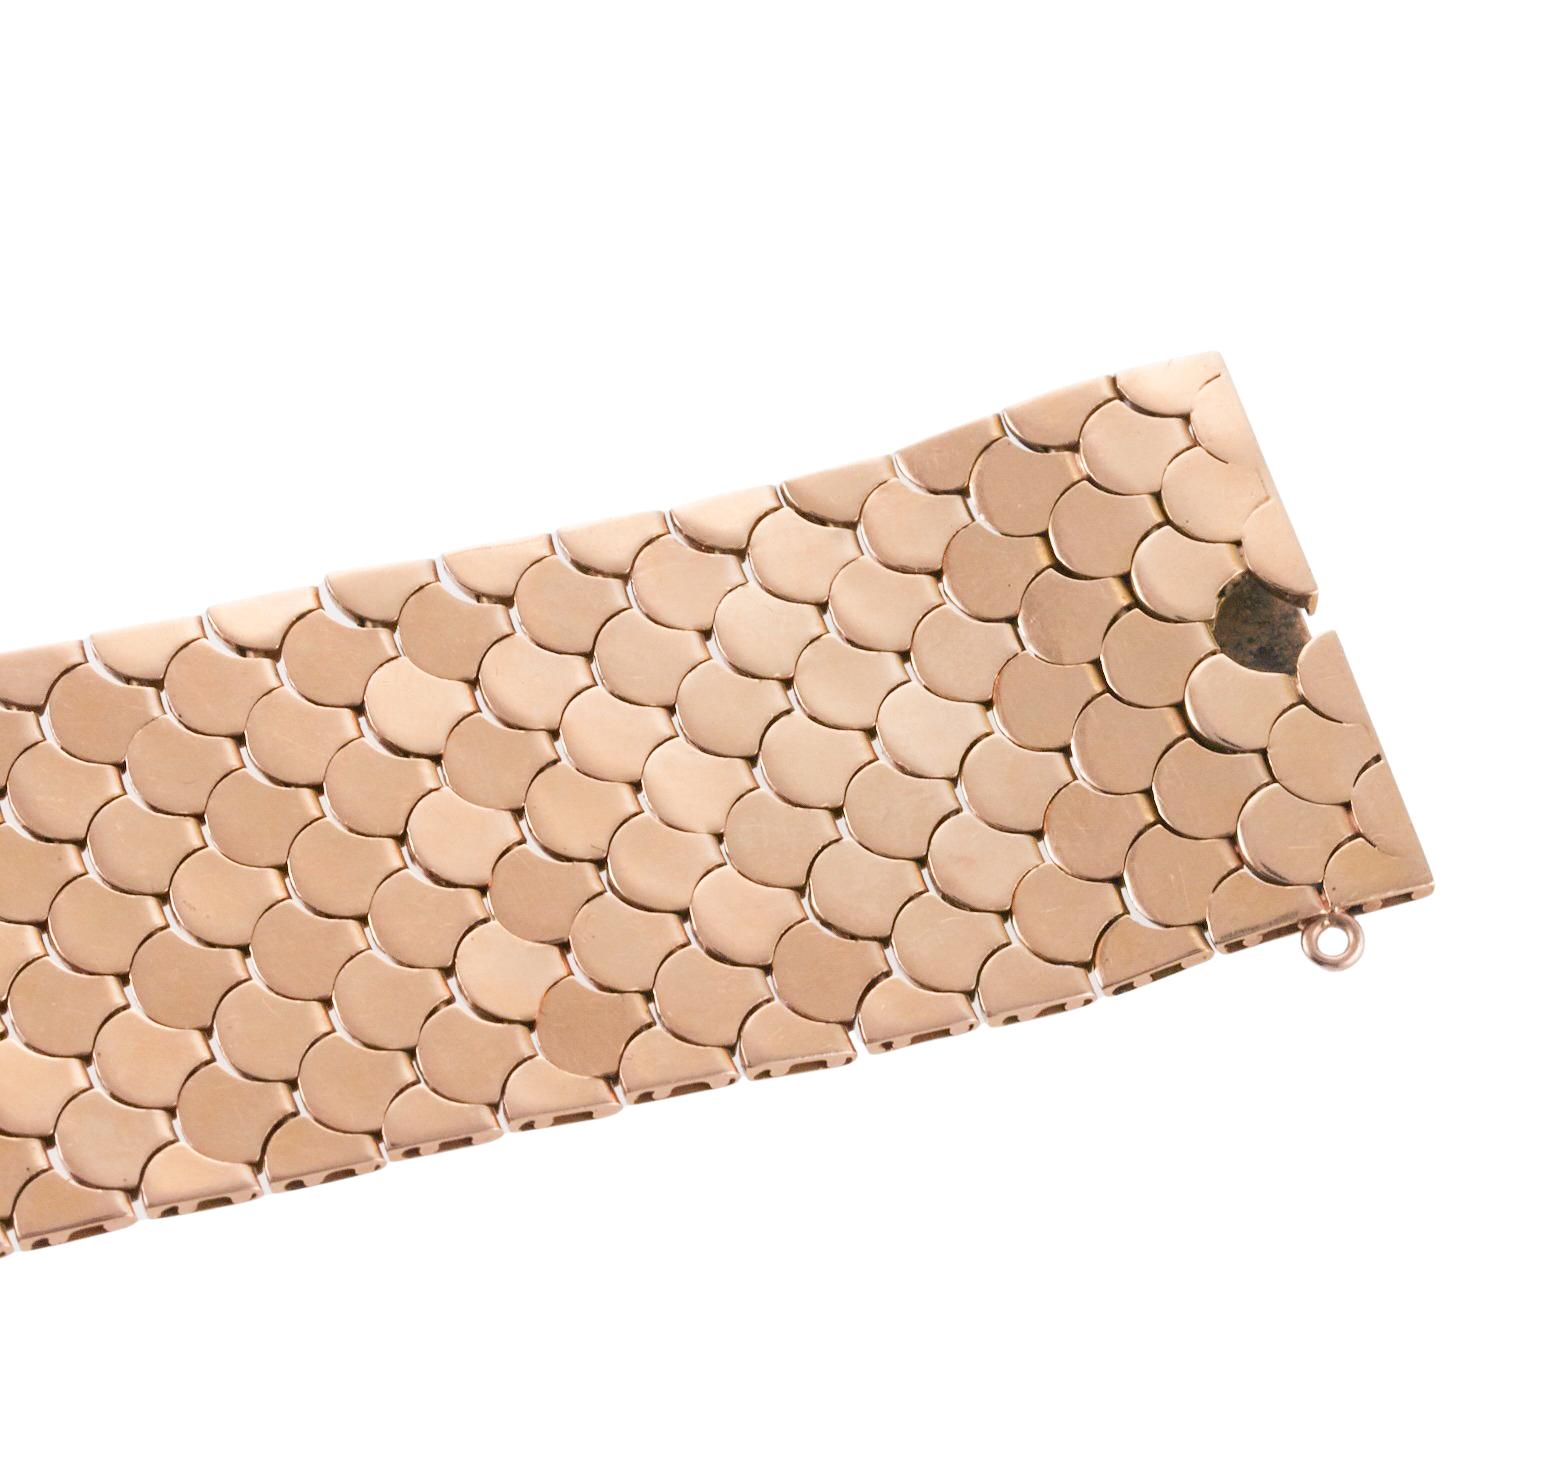 Iconic Retro Fish Scale Design Wide Gold Bracelet In Excellent Condition For Sale In New York, NY